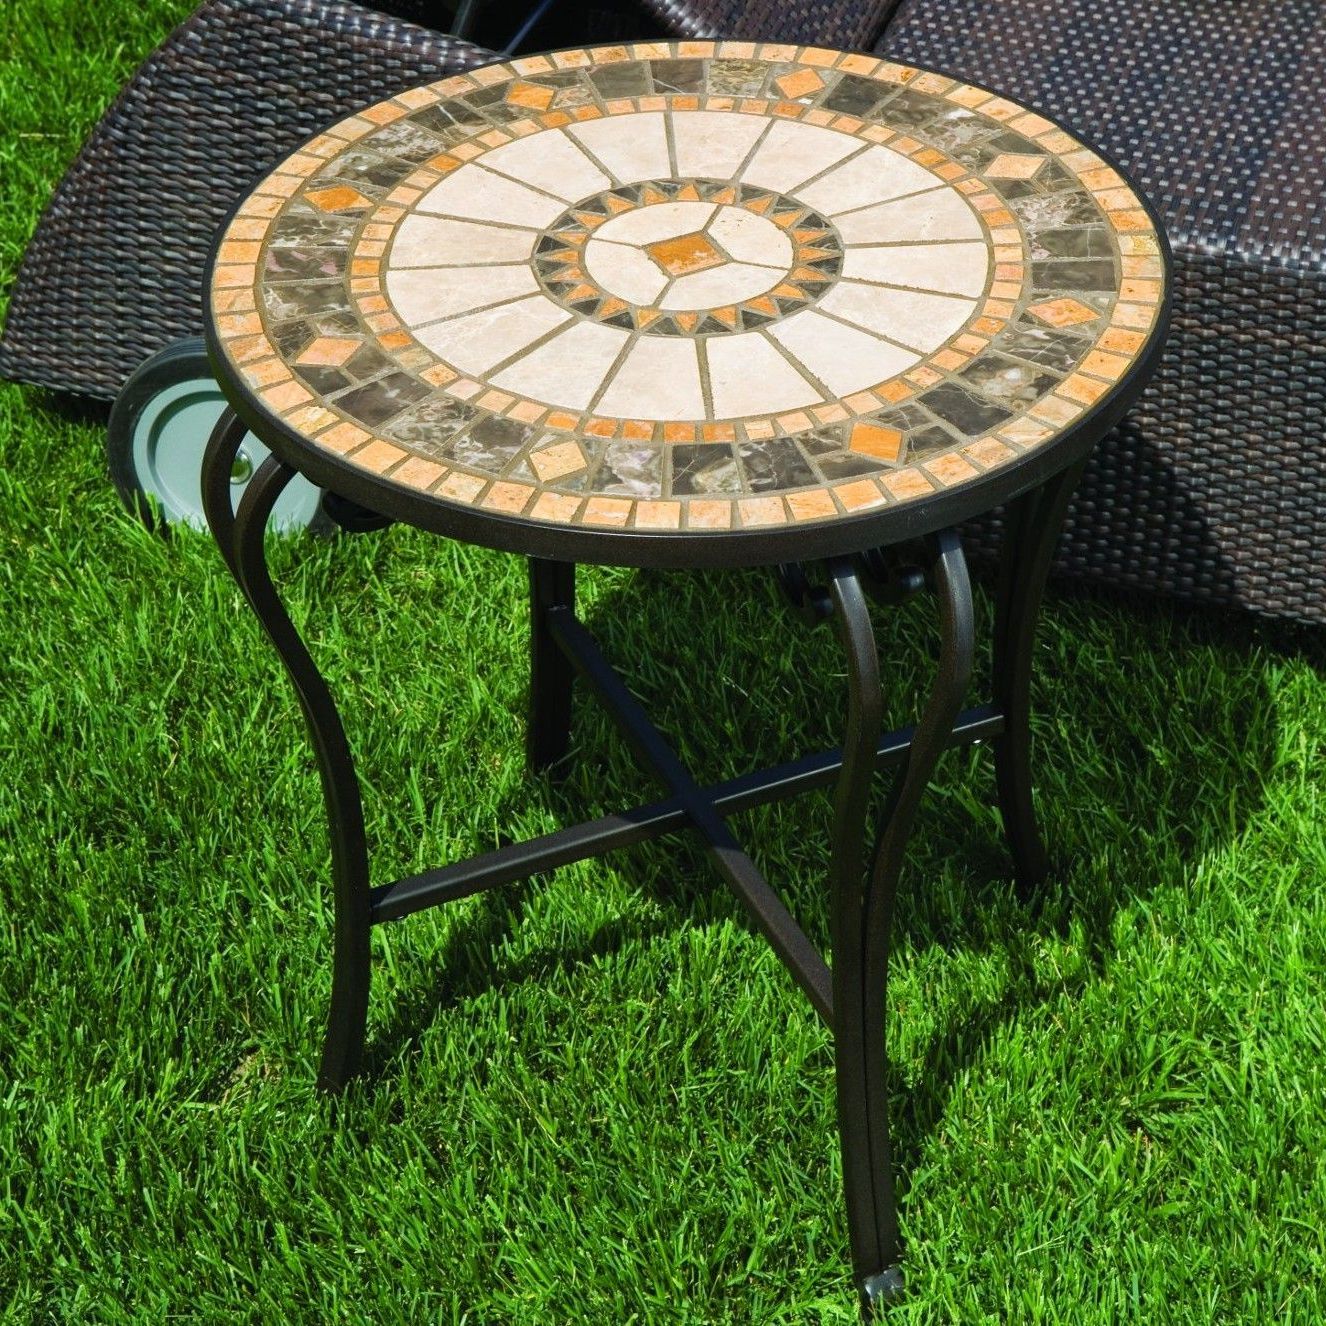 Mosaic Tile Top Round Side Tables Intended For Best And Newest Alfresco Home Compass Mosaic Side Table (View 3 of 15)